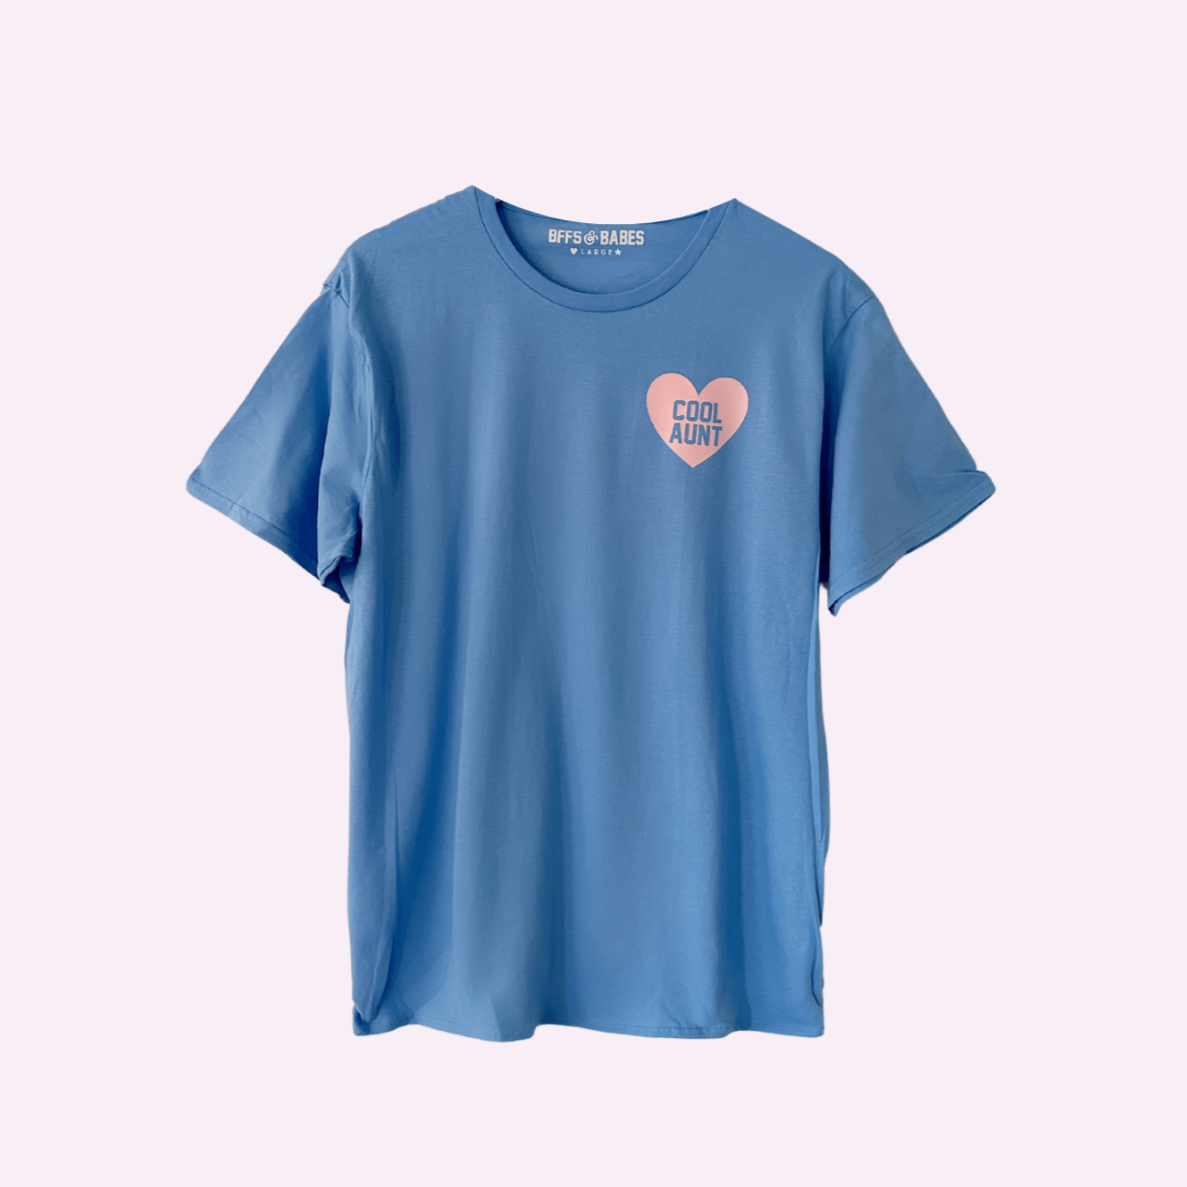 HEART U MOST ♡ blue adult tee with light pink heart